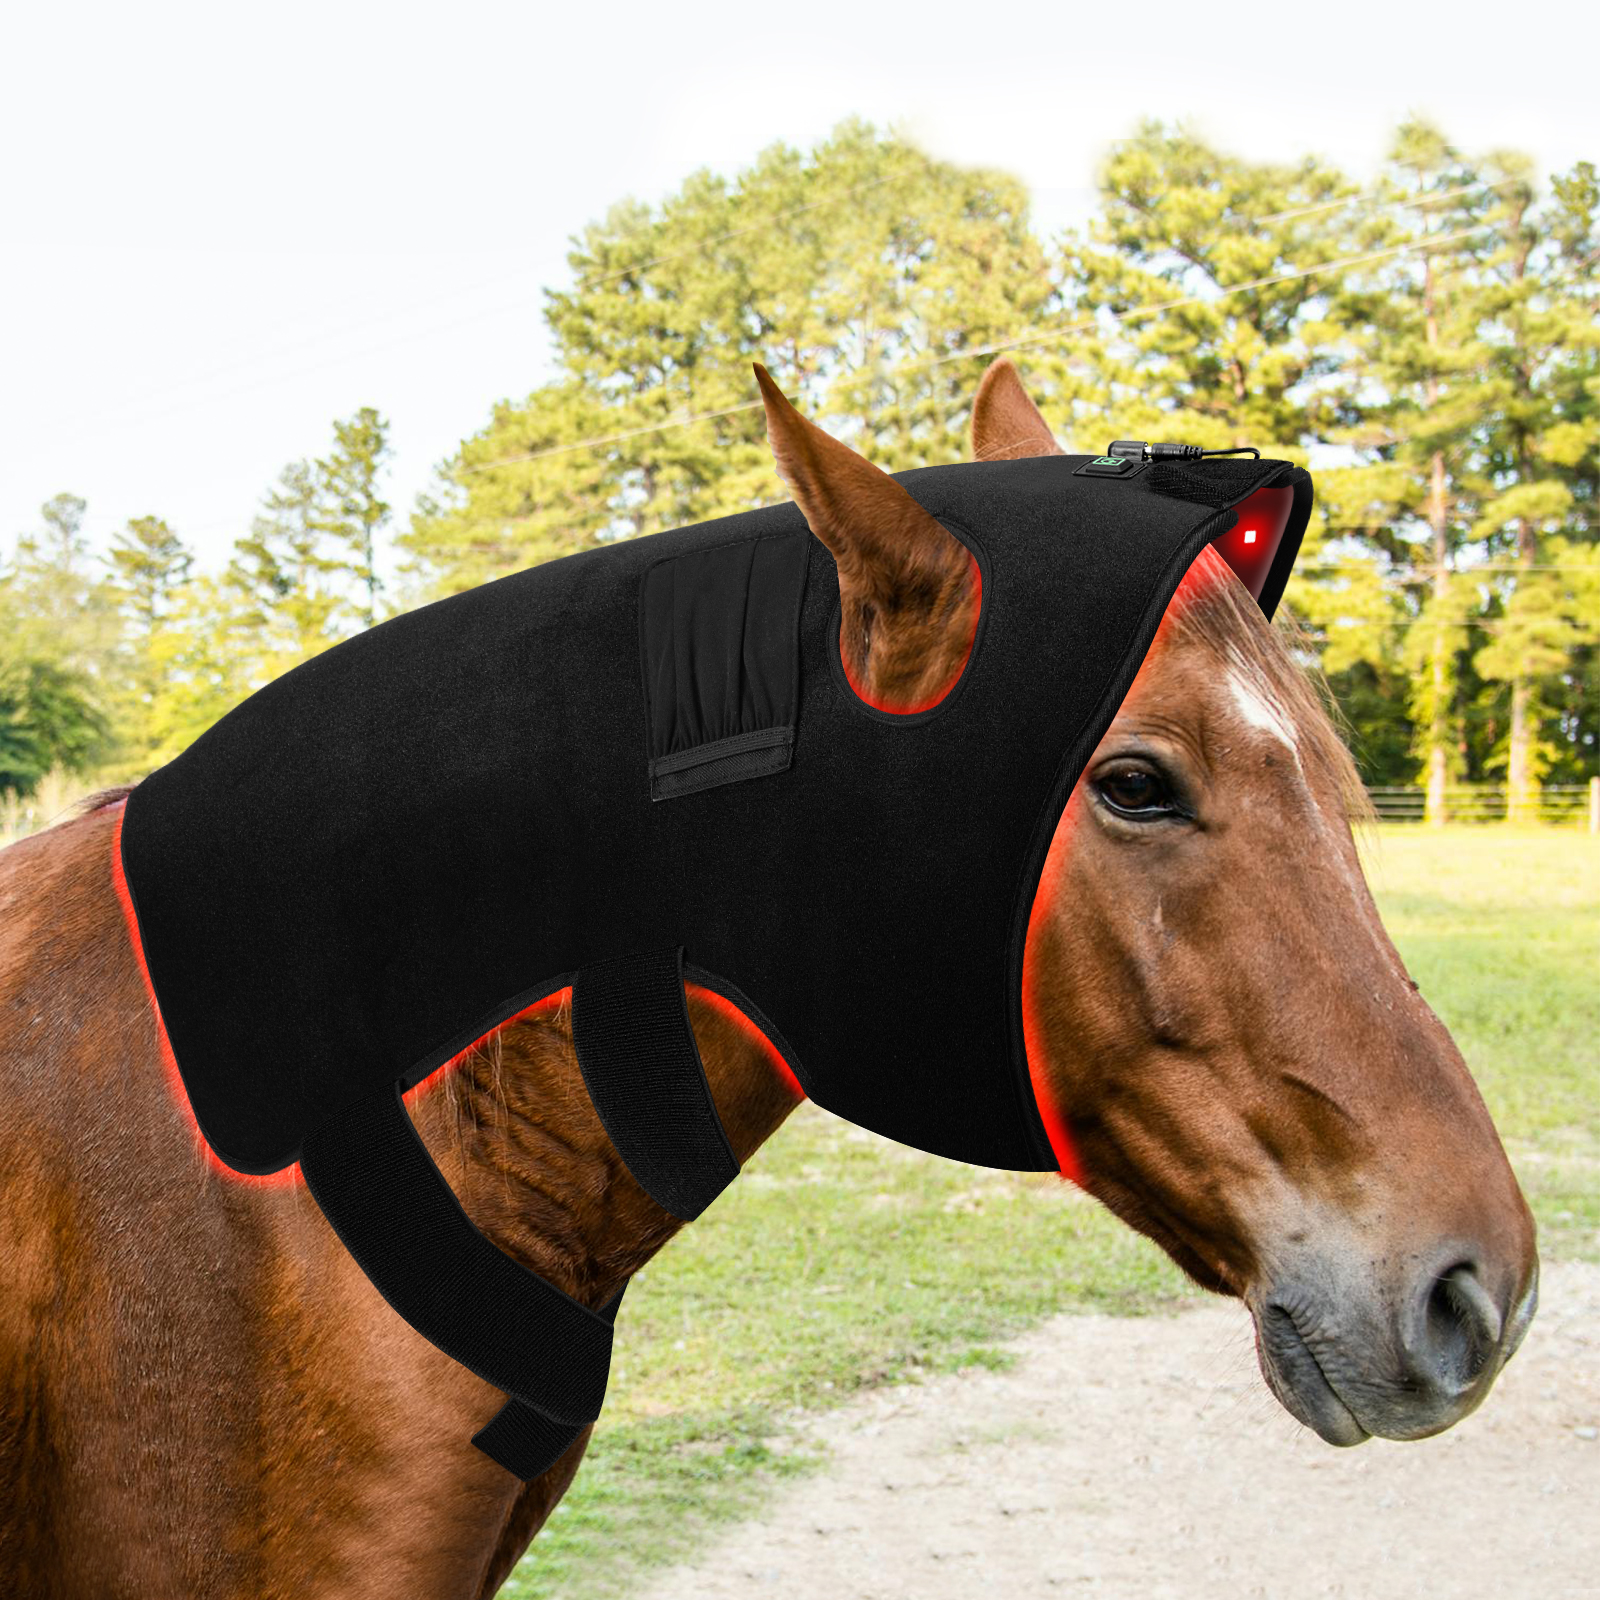 Red Light Therapy Happy Cap for Horses – The Horse Education Company